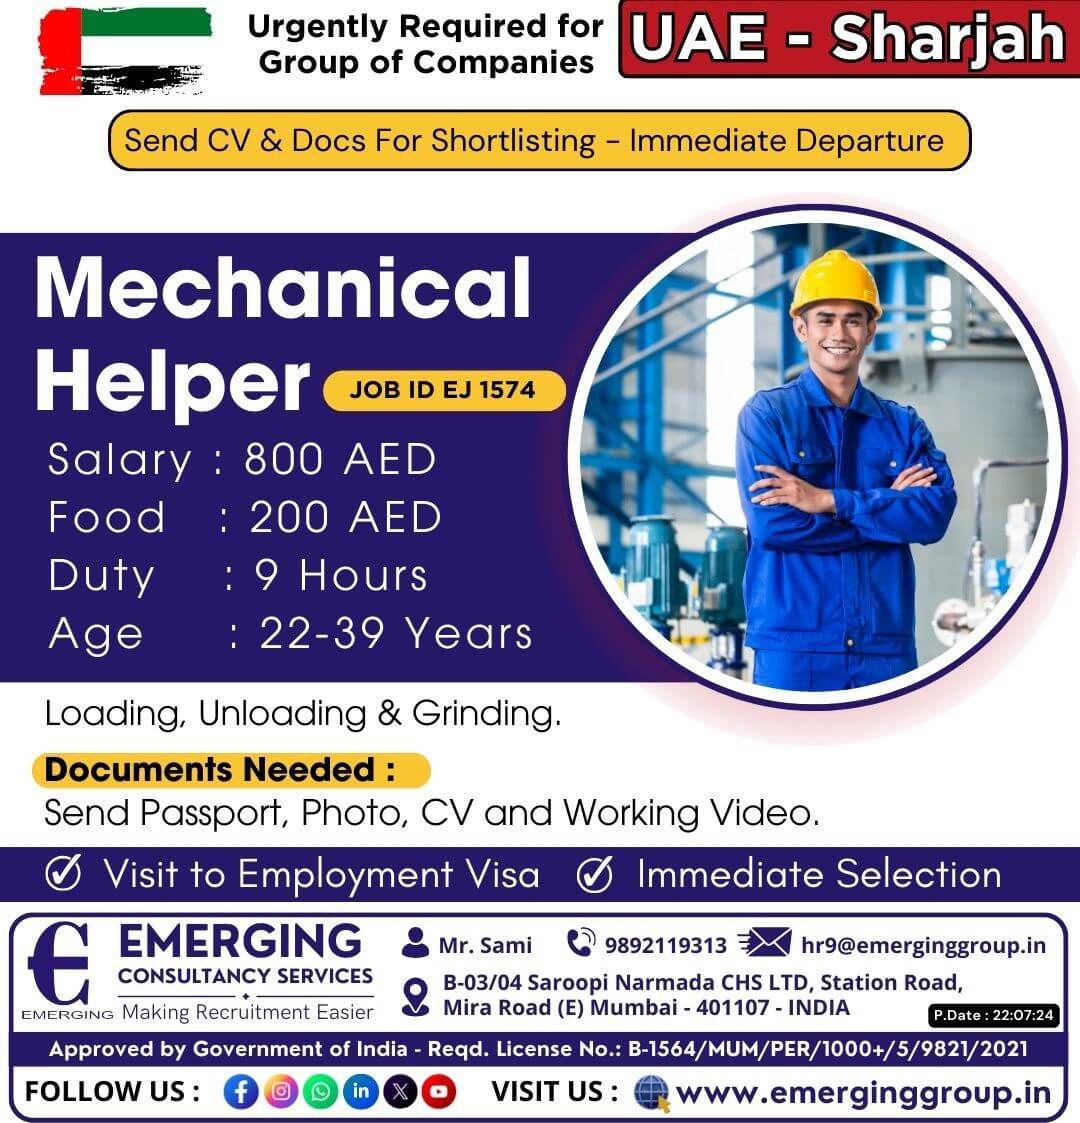 Urgently Required for Group of Companies in UAE - Sharjah